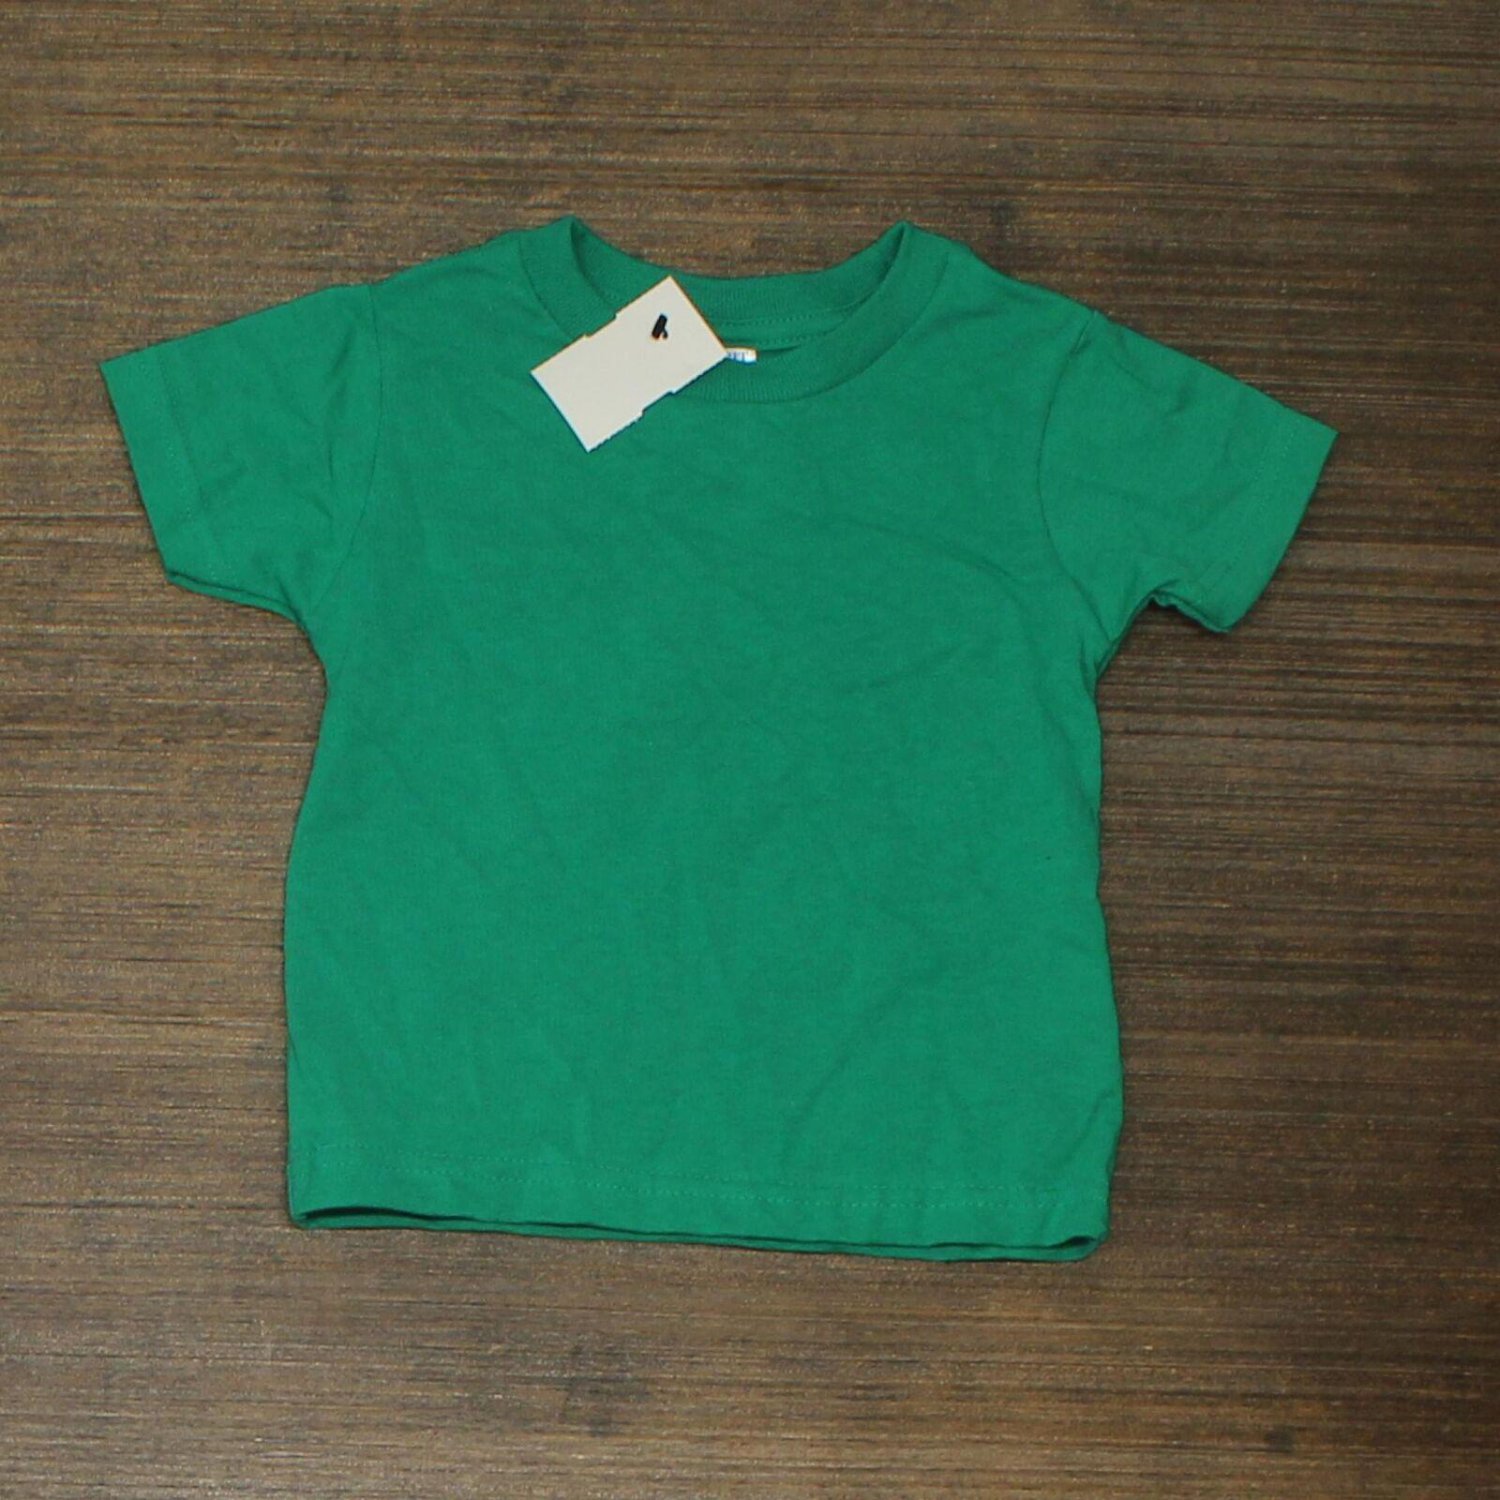 NWT Rabbit Skins Toddler Cotton Jersey Tee 3301T 3T Kelly Green